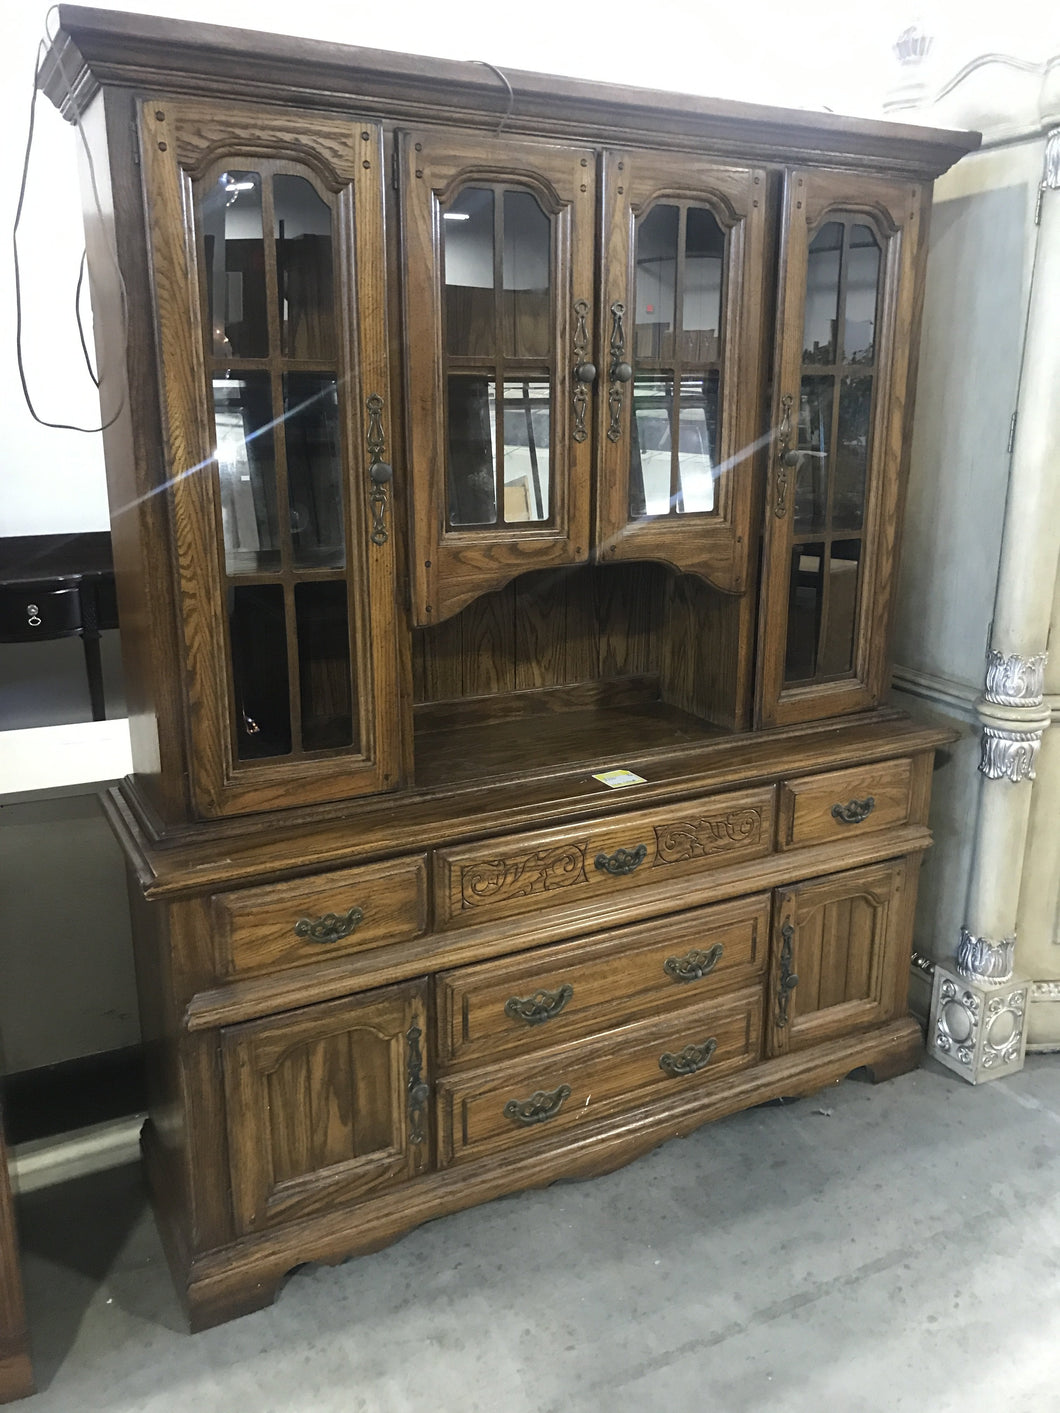 China Cabinet - Kenner Habitat for Humanity ReStore